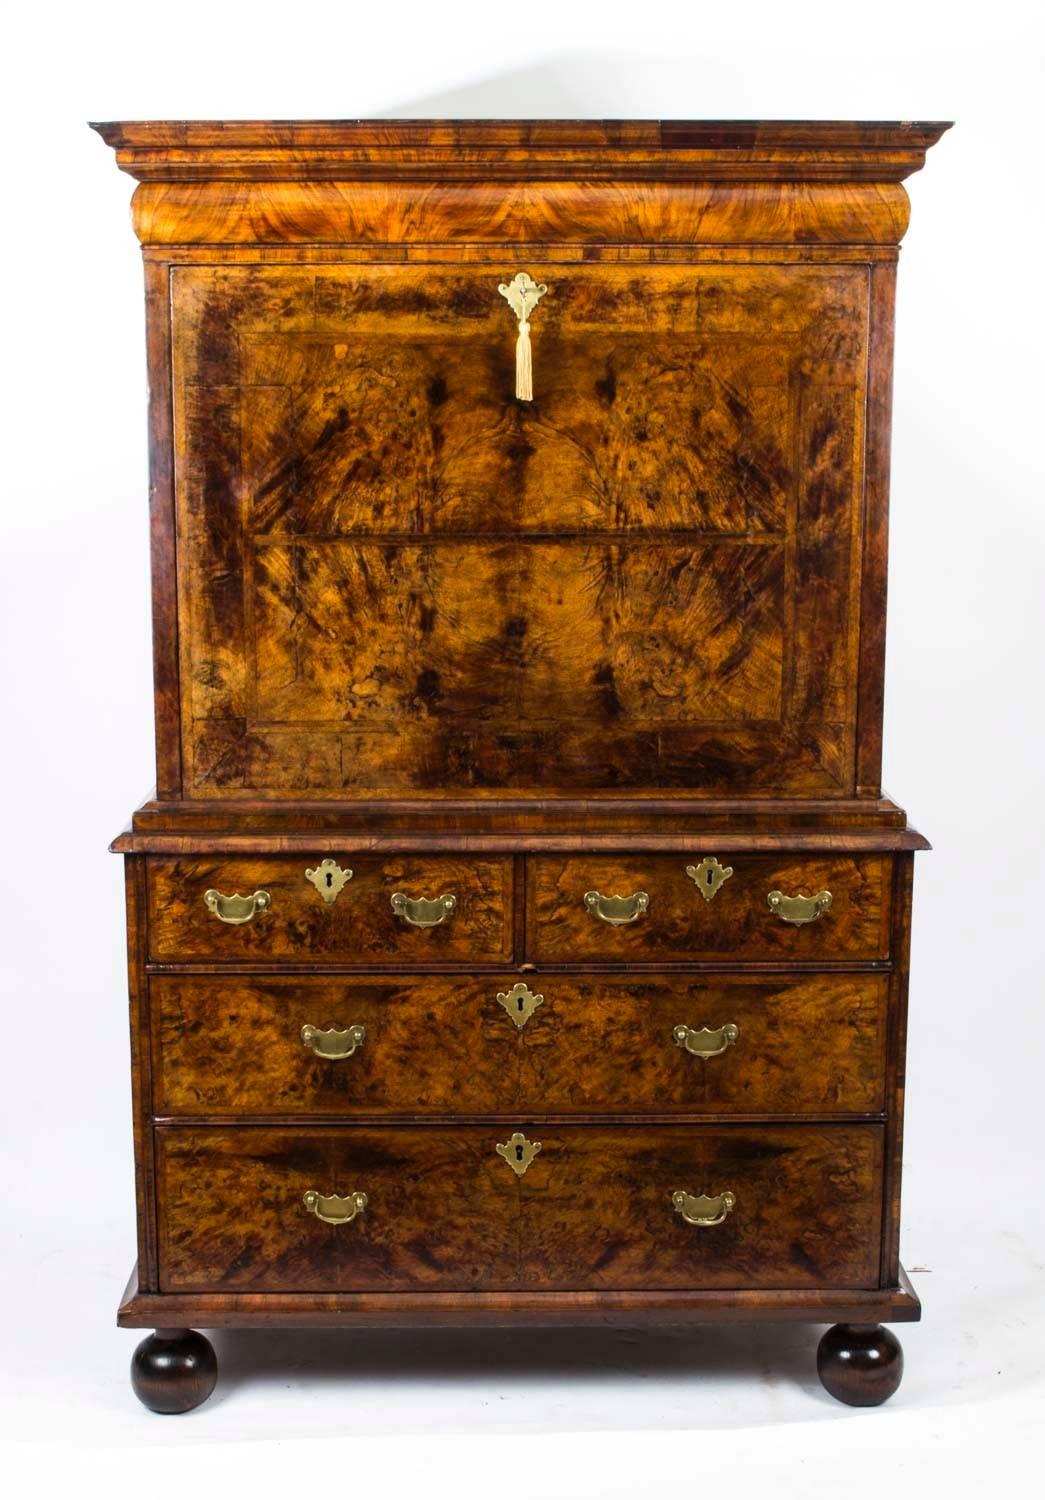 Dating from around 1705, this very special piece of finely crafted furniture is an antique walnut secretaire in the Queen Anne style.

This very early 18th Century Queen Anne antique walnut secretaire chest is sure to fill you with admiration when